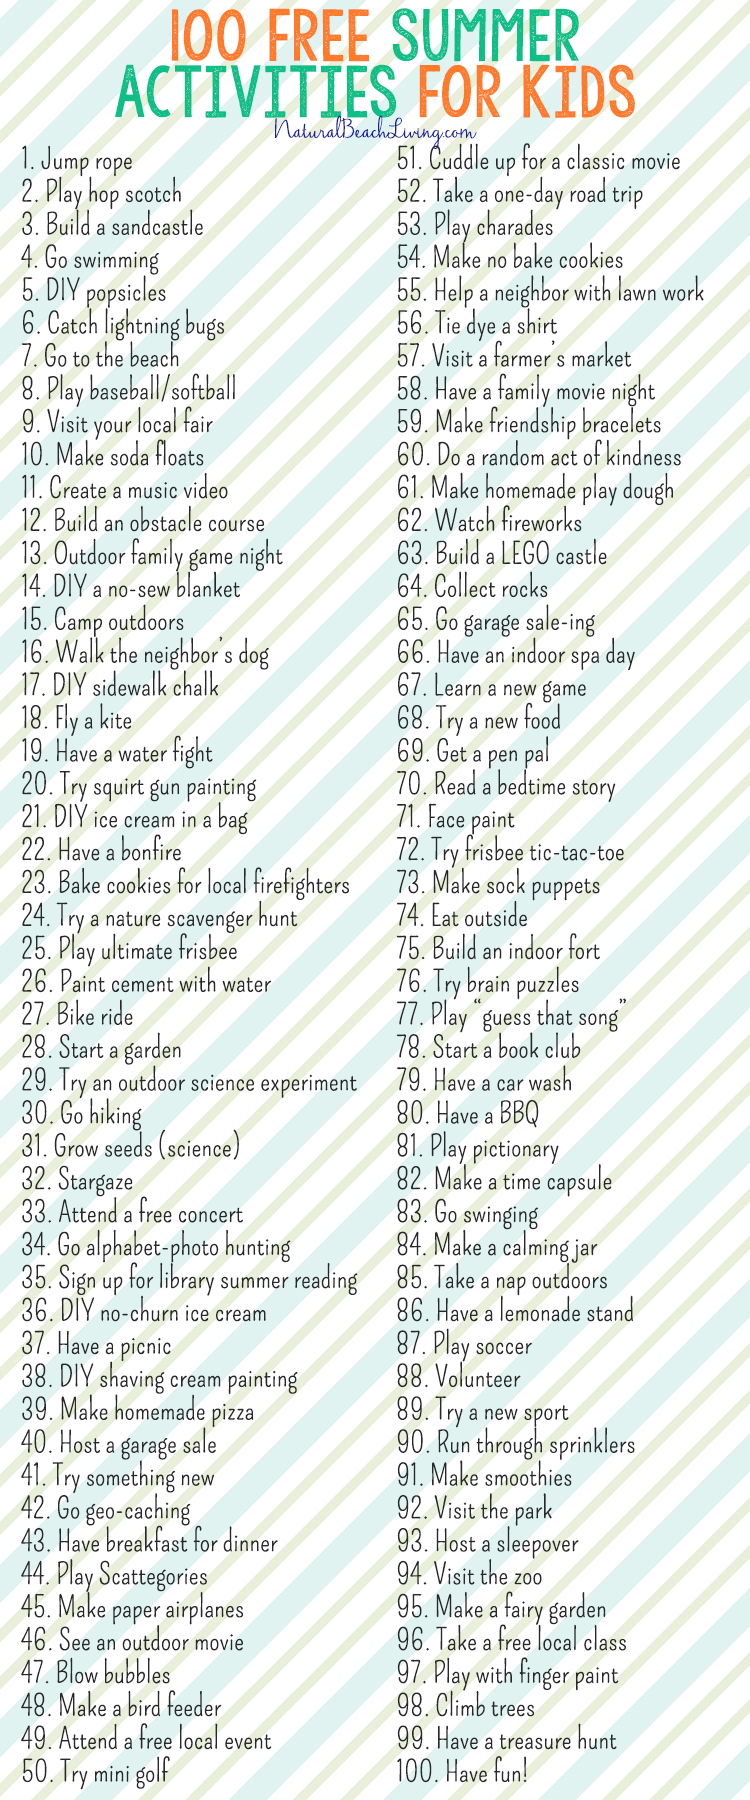 50 No Spend Weekend Activities that Everyone Loves, no spend weekend ideas, fun things to do on weekends, Free activities to do with kids, Free no spend weekend printable, free things to do with kids all year, things to do in a small town with no money, budgeting, No spend Challenge, No Spend Month